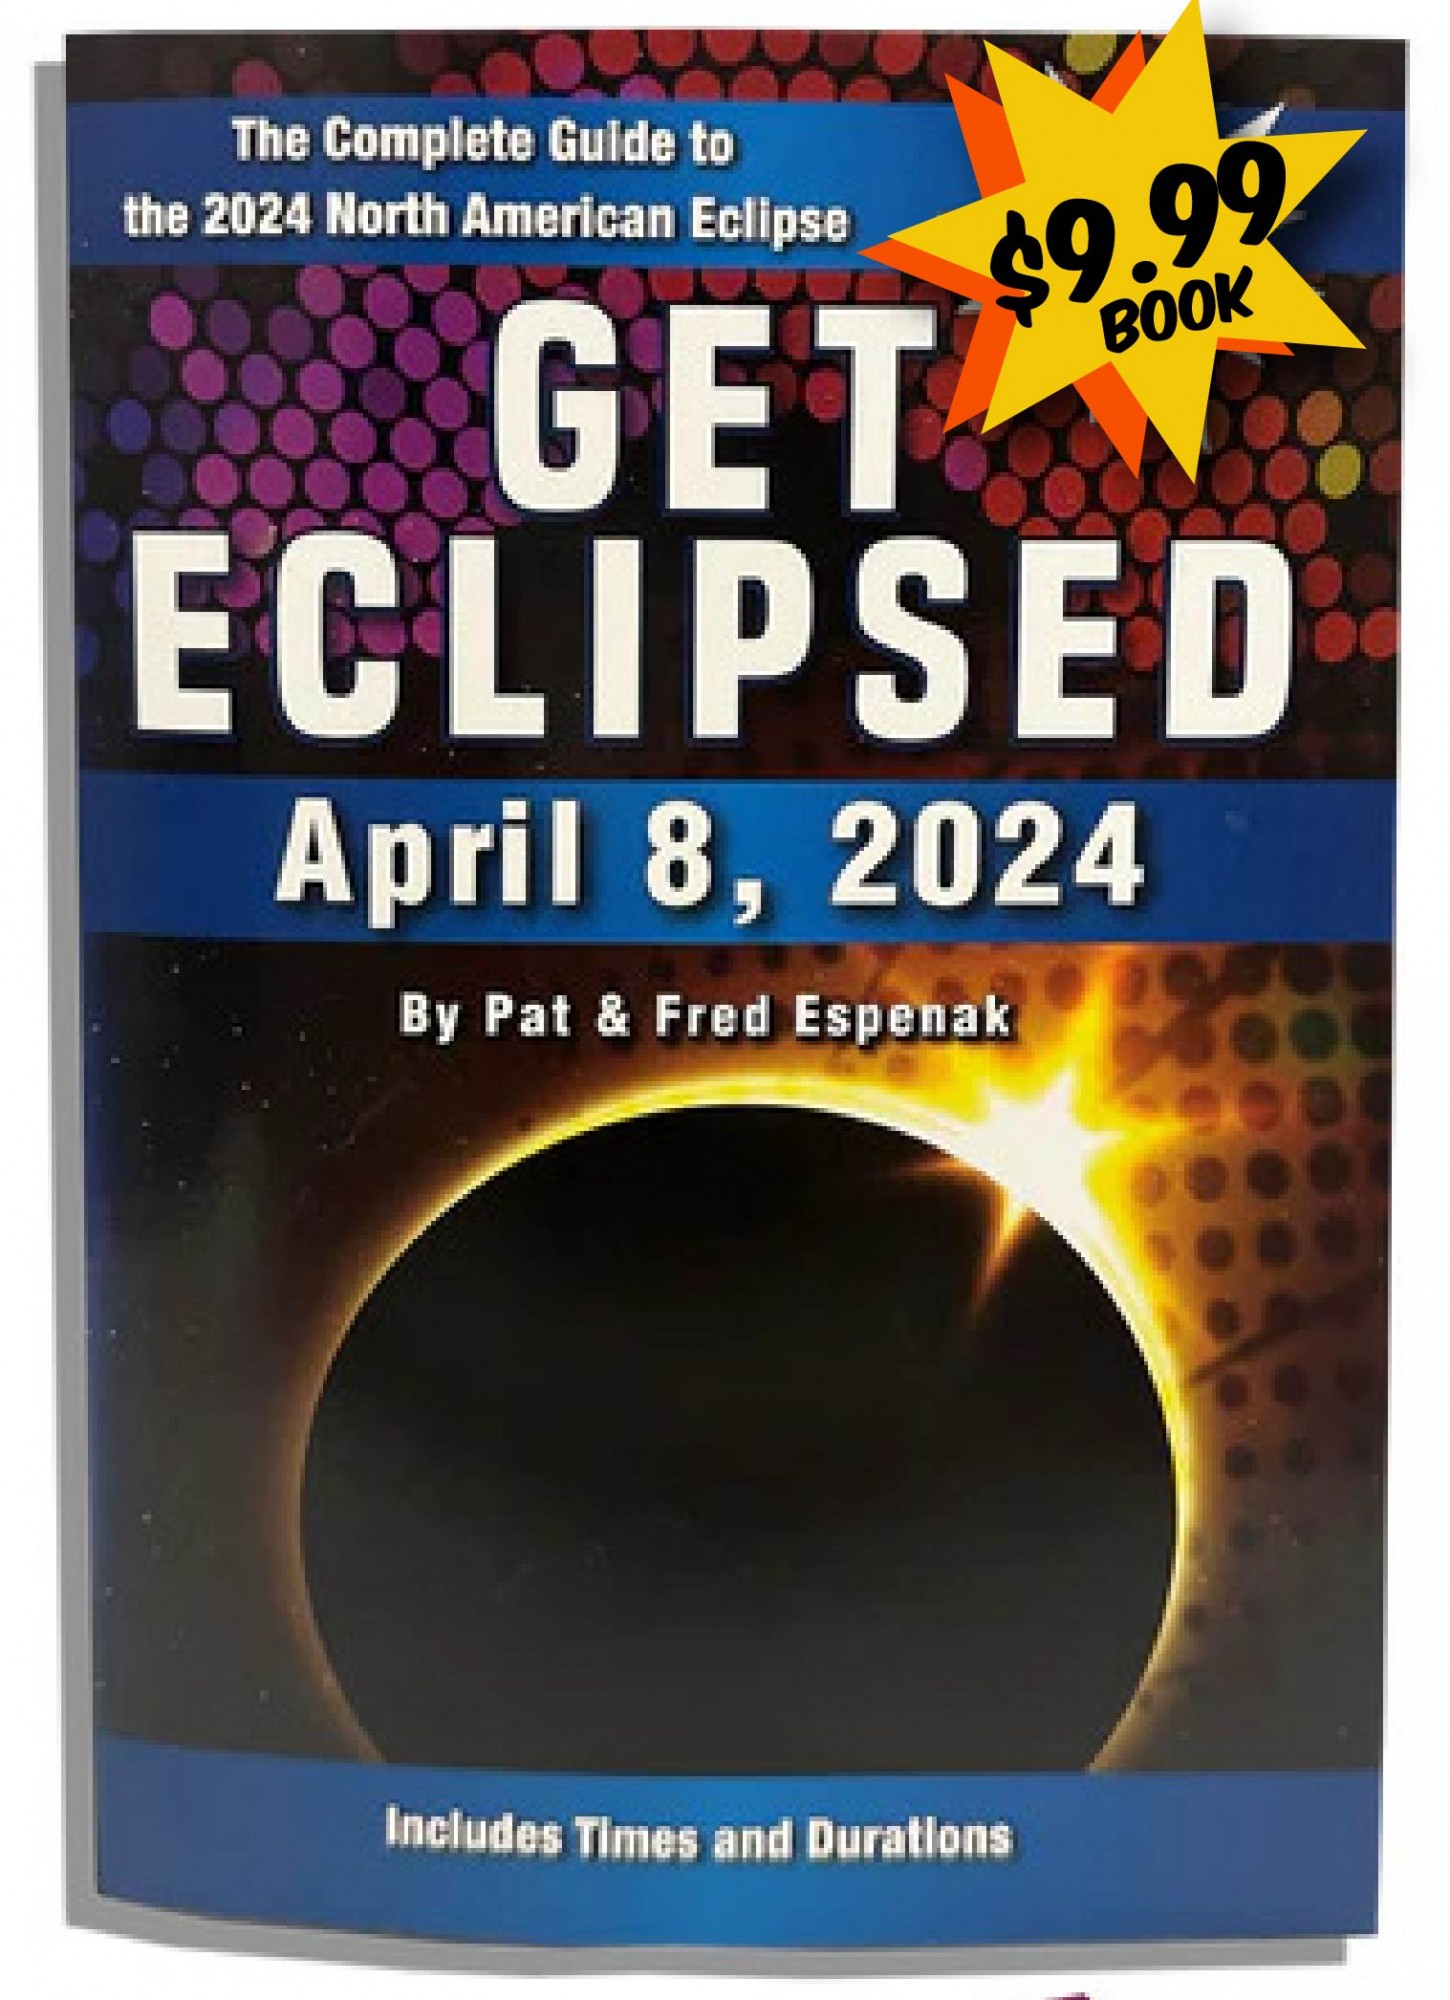 Get Eclipsed - The Complete Solar Guide to the 2024 North American Eclipse 